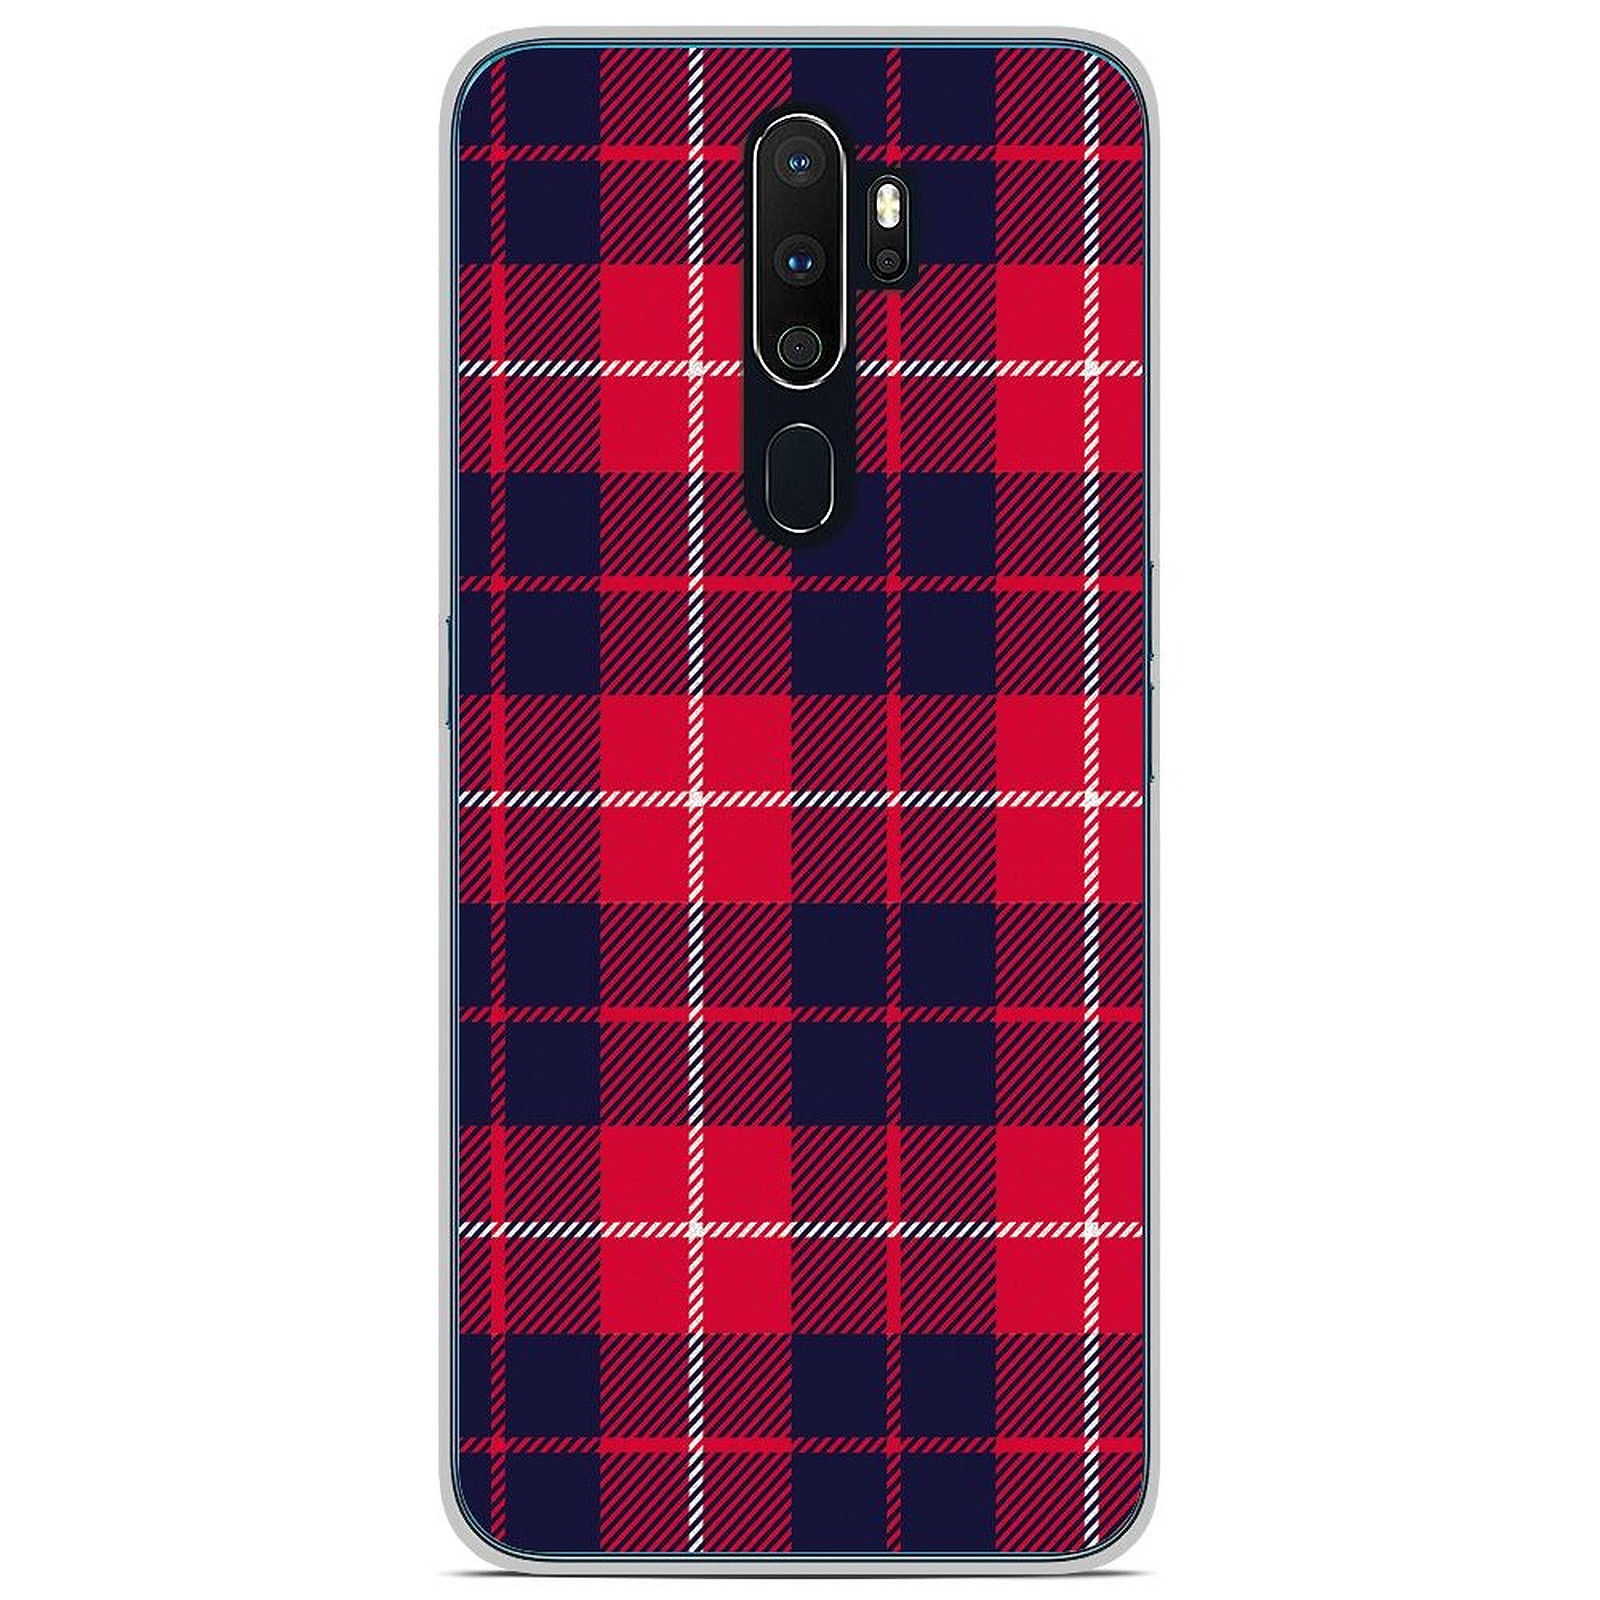 1001 Coques Coque silicone gel Oppo A9 2020 motif Tartan Rouge 2 - Coque telephone 1001Coques